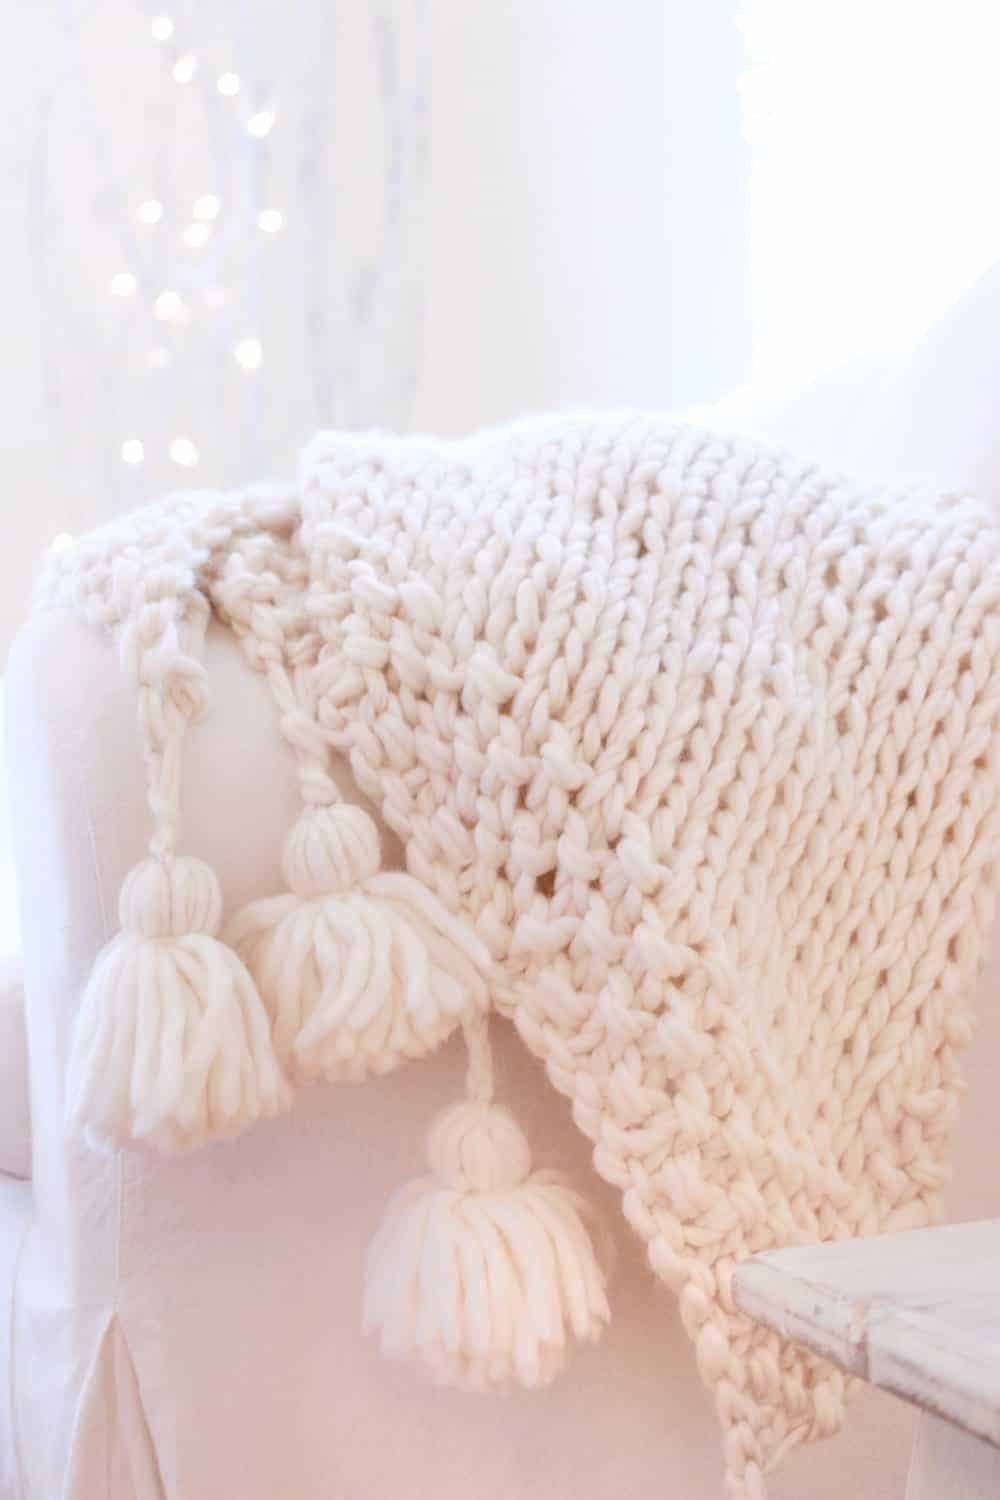 Chunky Wool Throw Knitting Pattern 11 Cozy Chunky Blankets Youll Want To Knit This Weekend Ideal Me